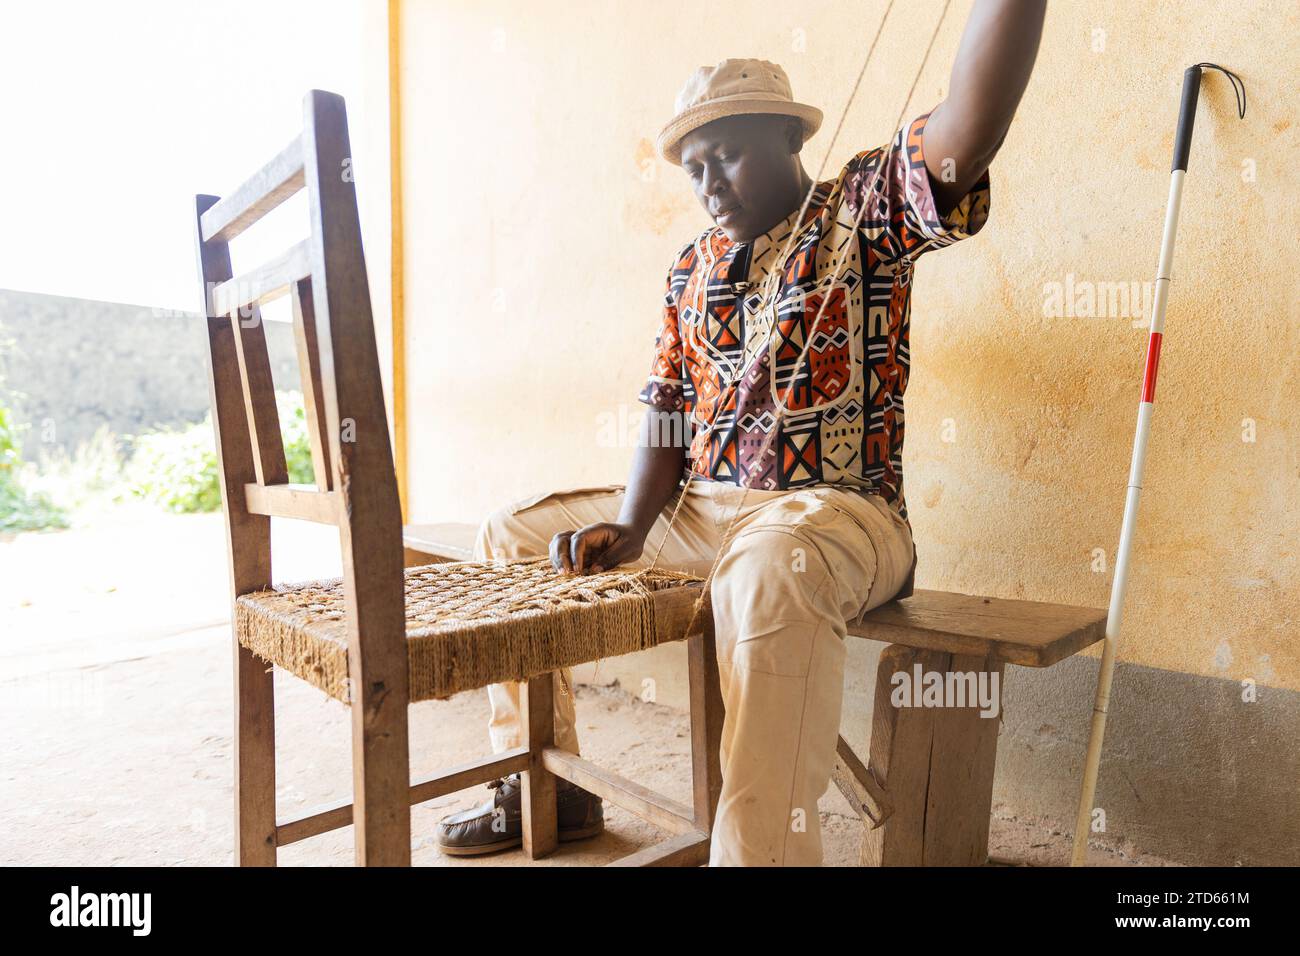 Blind African man sitting, engaged in weaving a dining chair. Blindness and work concept. Stock Photo